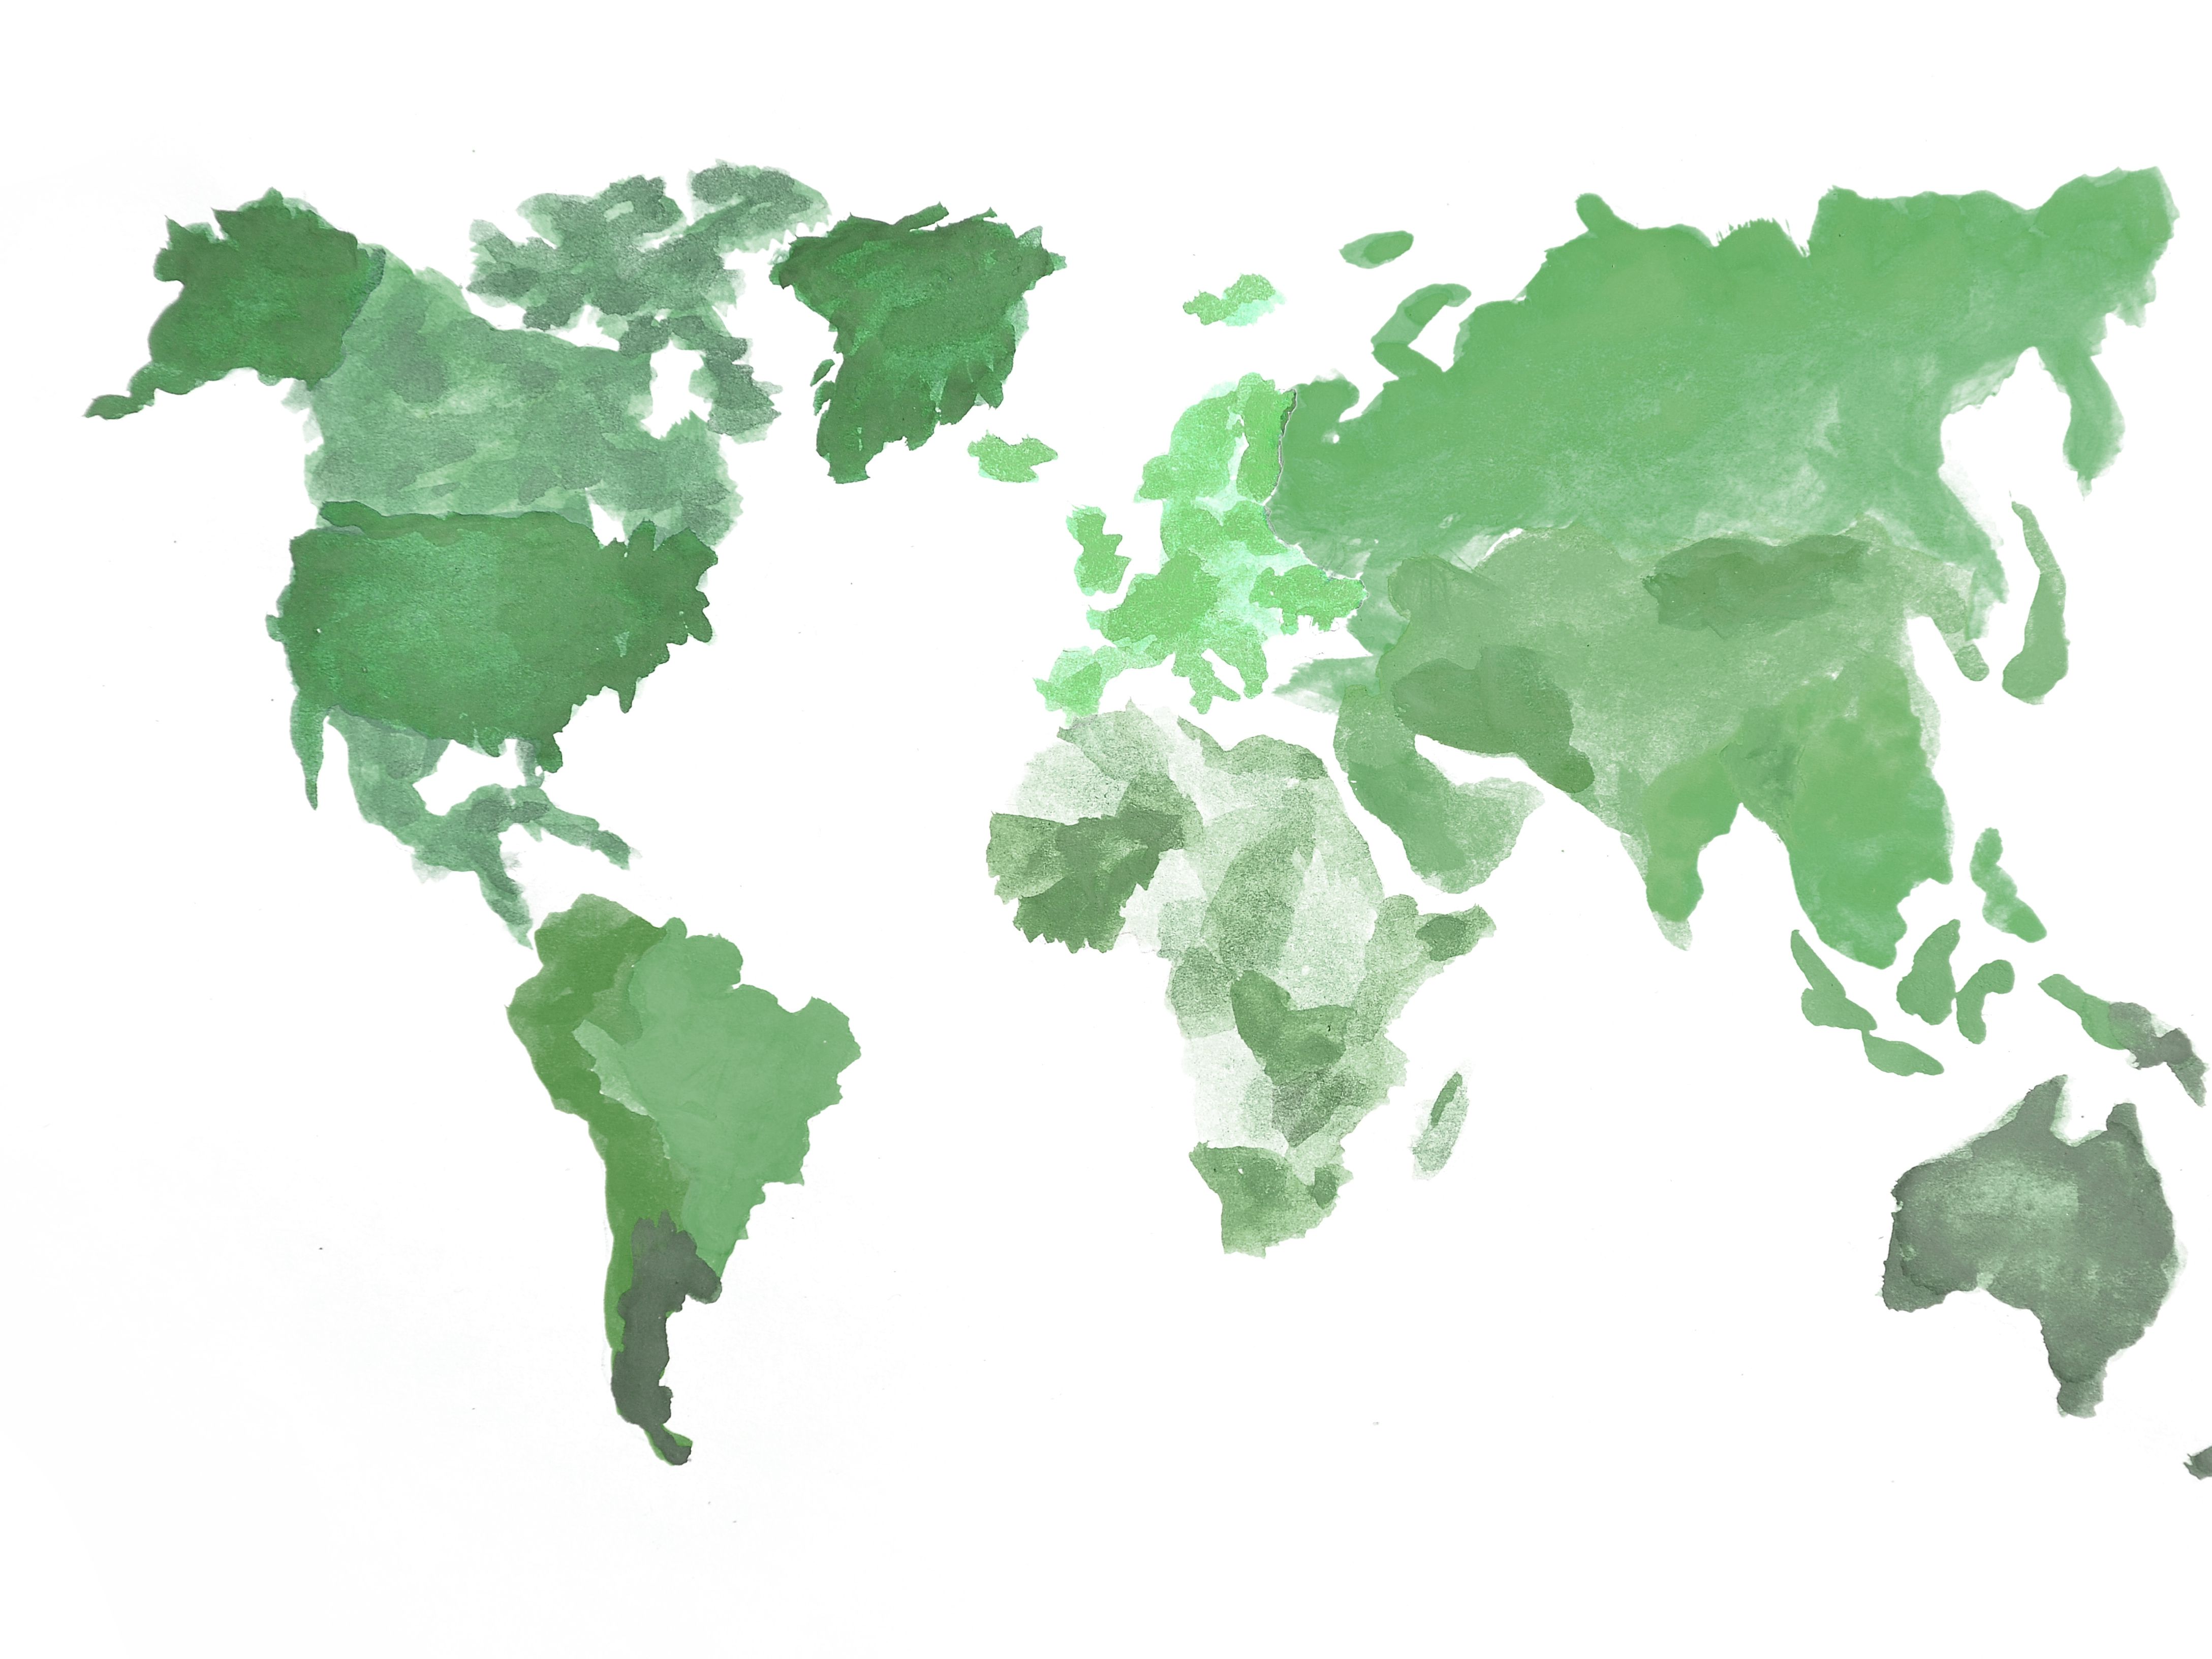 The World Map Is Made With Camouflage Watercolor P 2021 08 30 05 41 09 Utc